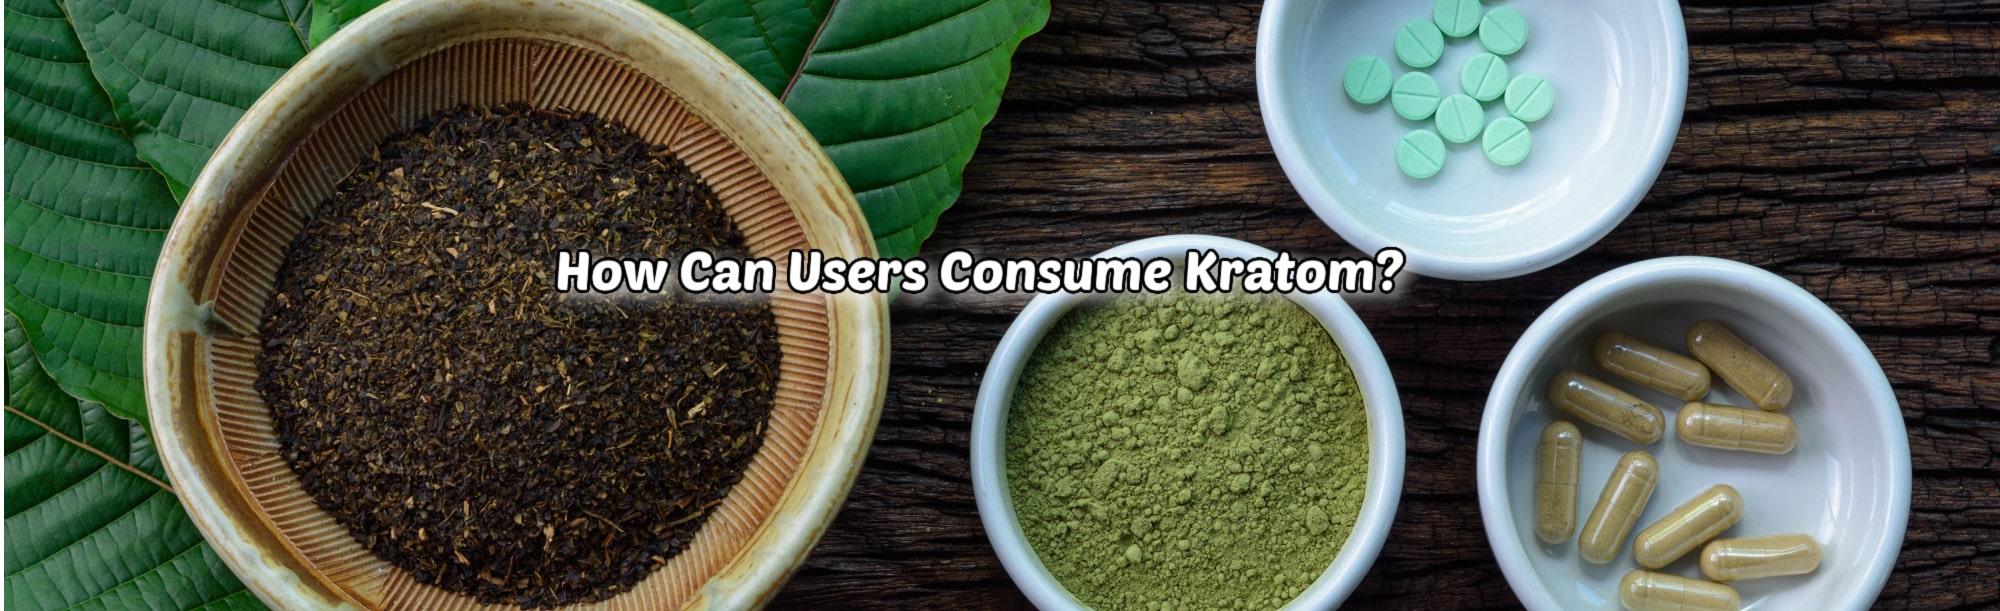 image of how can users consume kratom